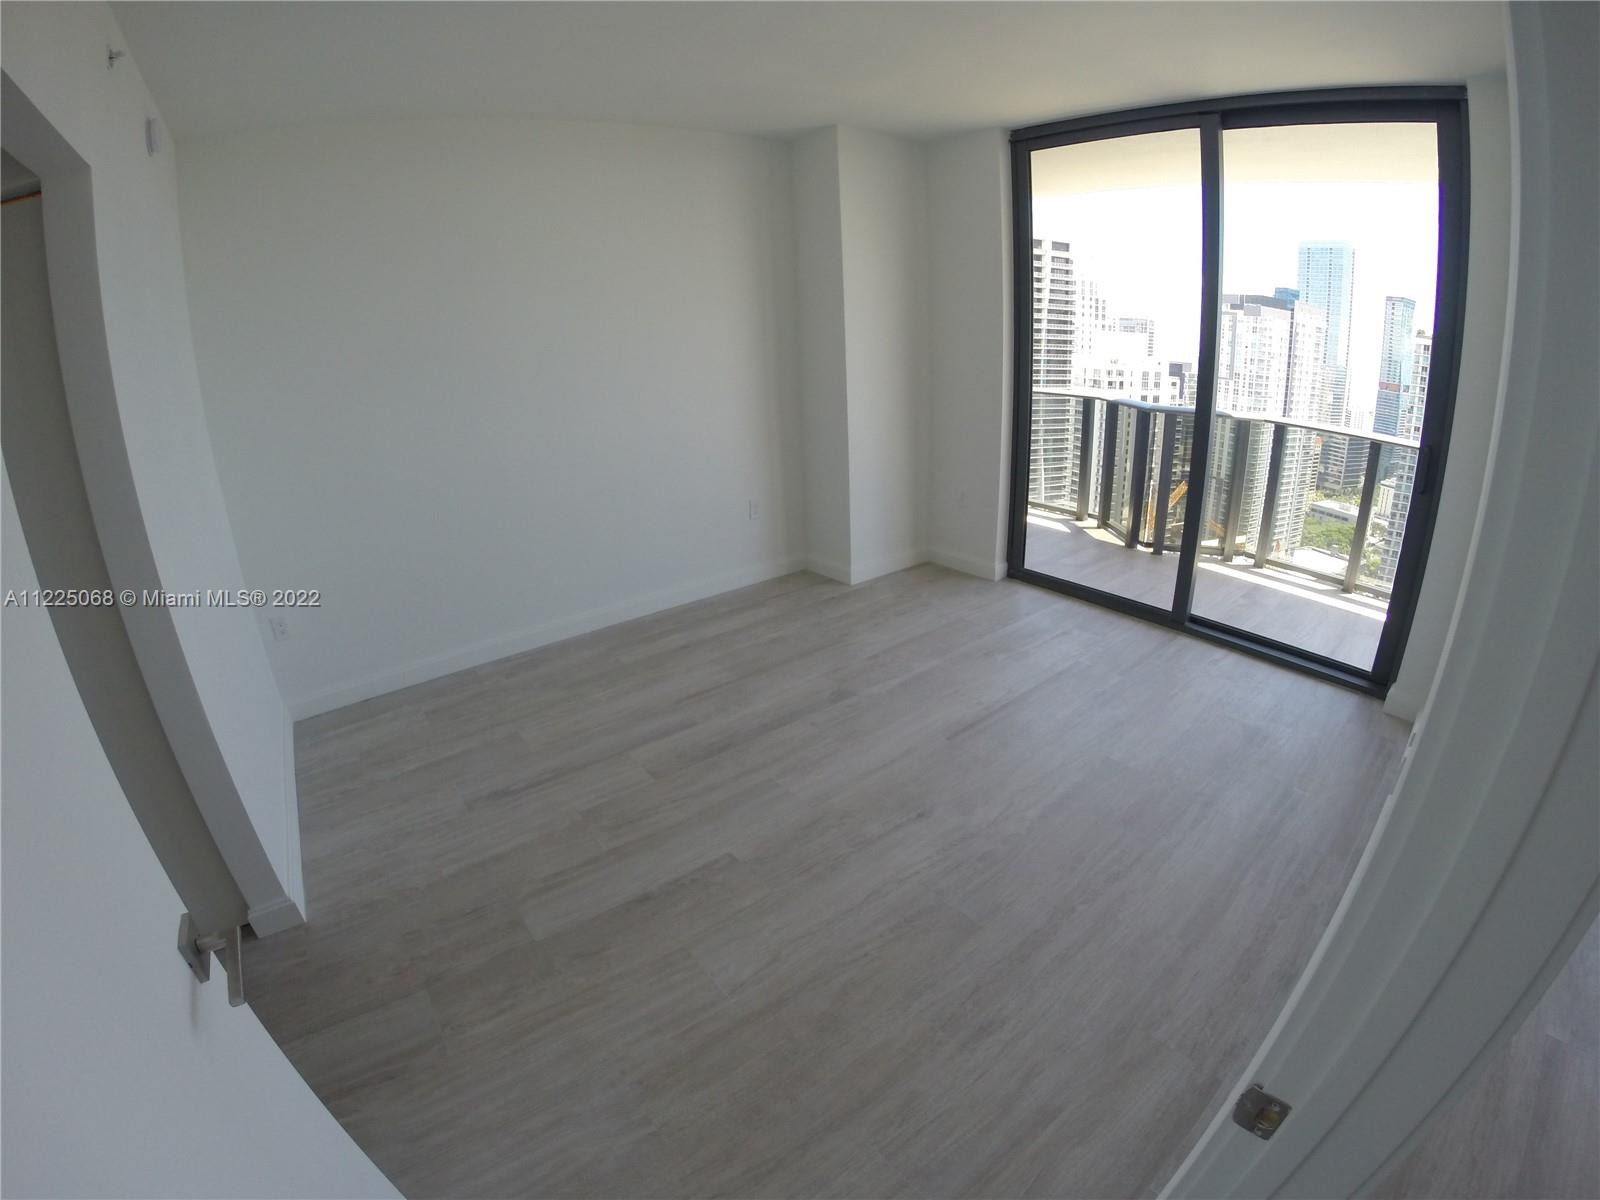 Photo 15 of Brickell Heights E Apt 4304 in Miami - MLS A11225068